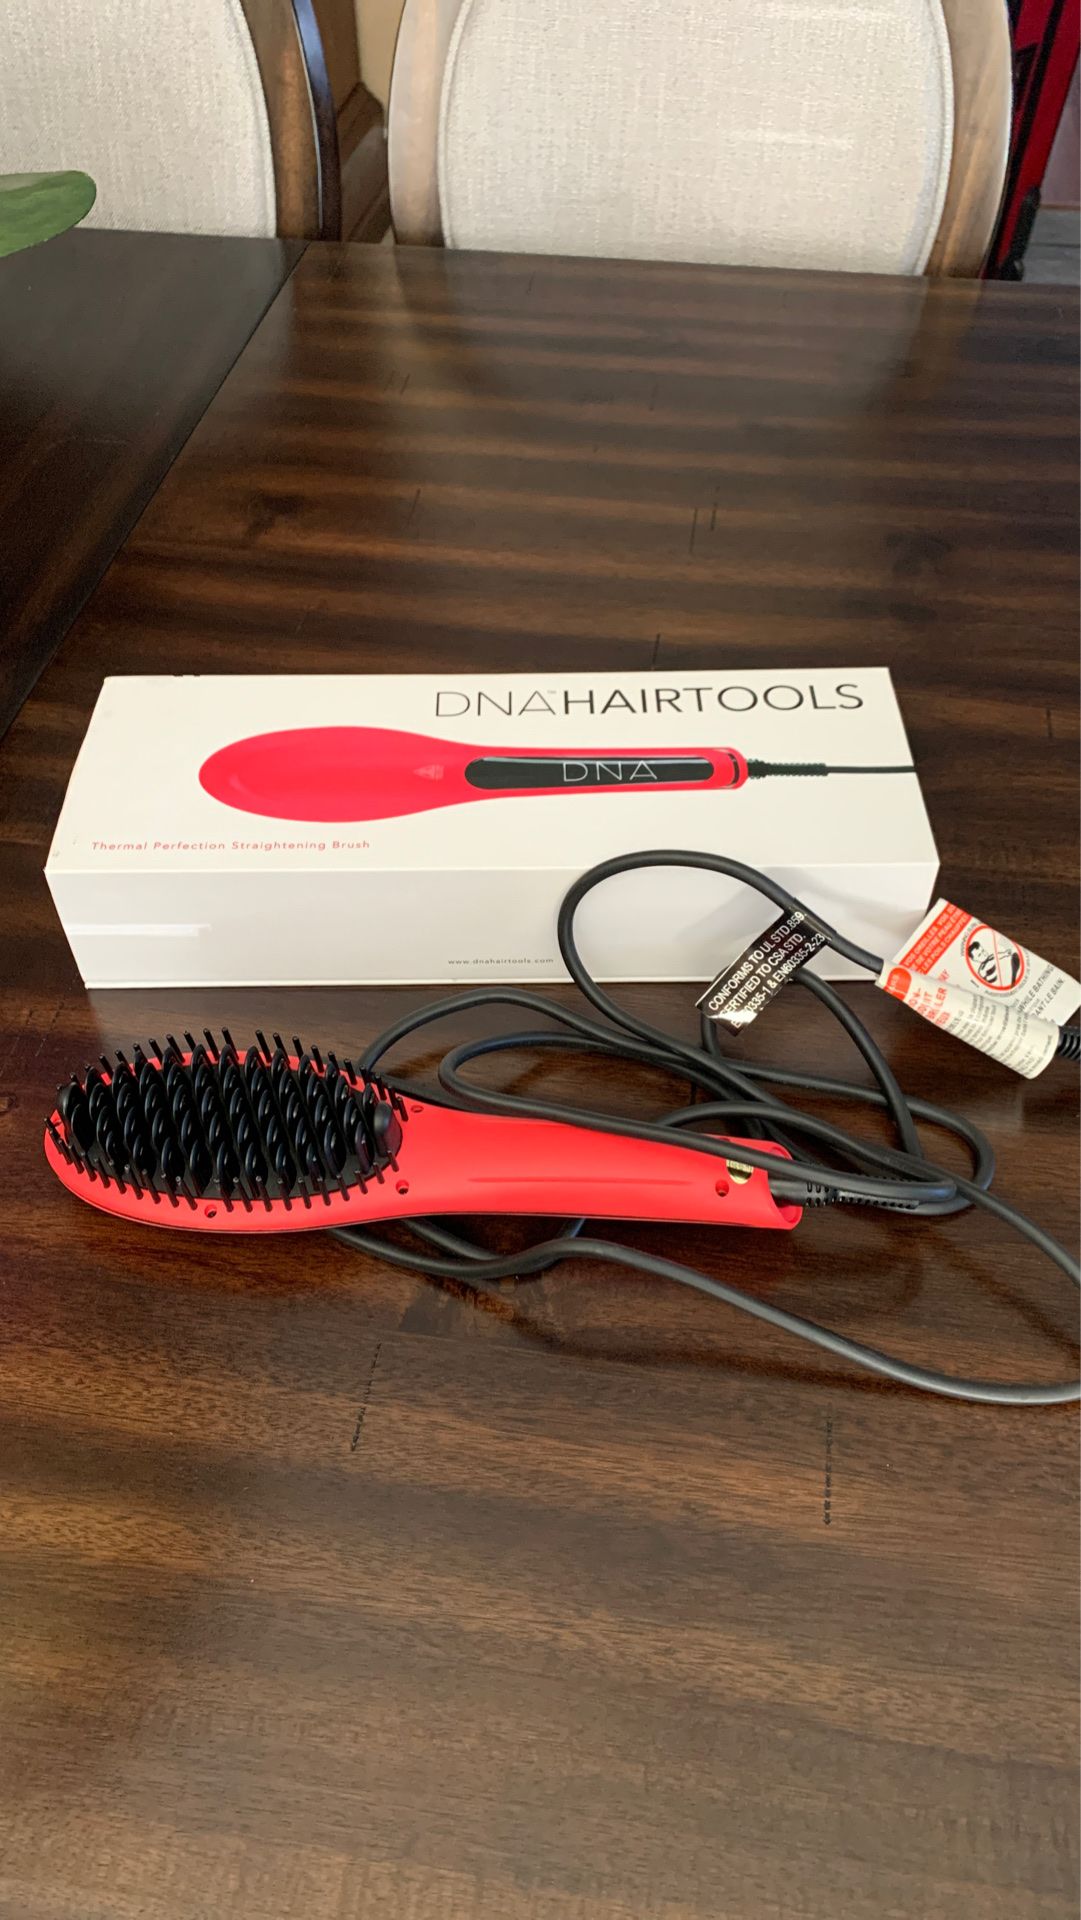 DNA hair tools thermal perfection straightening brush